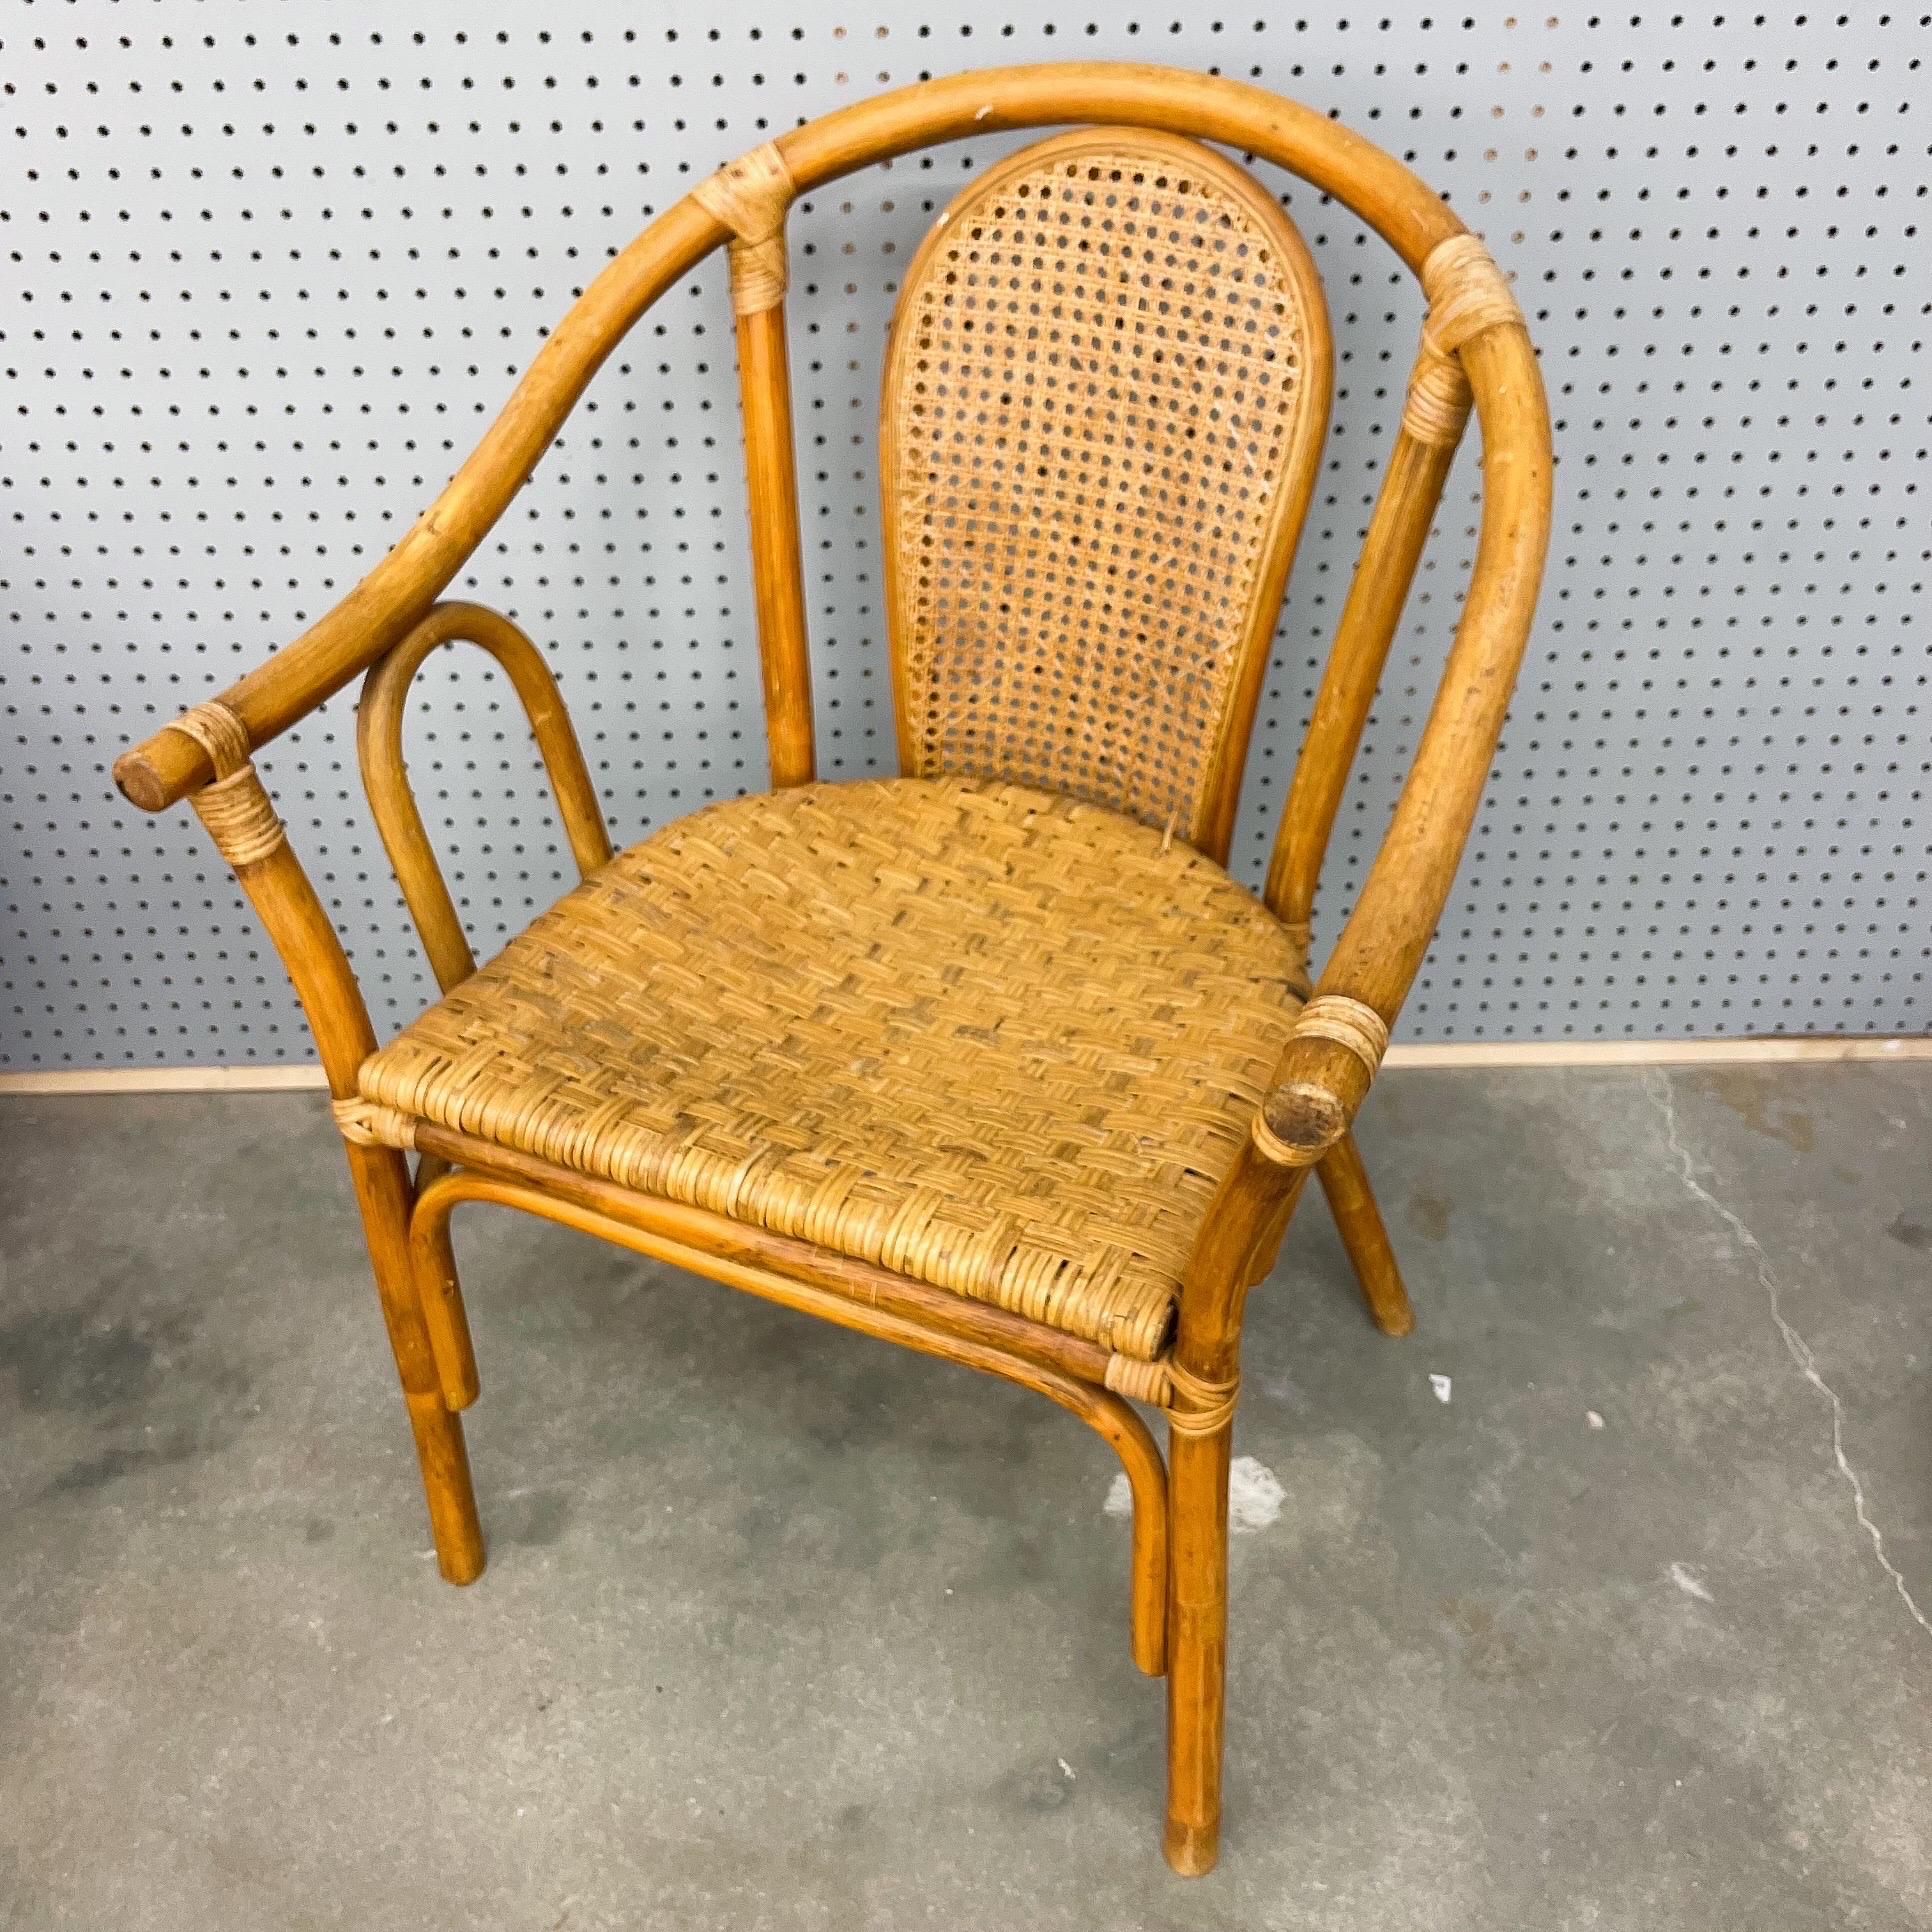 Mid 20th Century Bamboo Rattan Dining Chairs With Cane Inset Back - Set of 4 For Sale 2